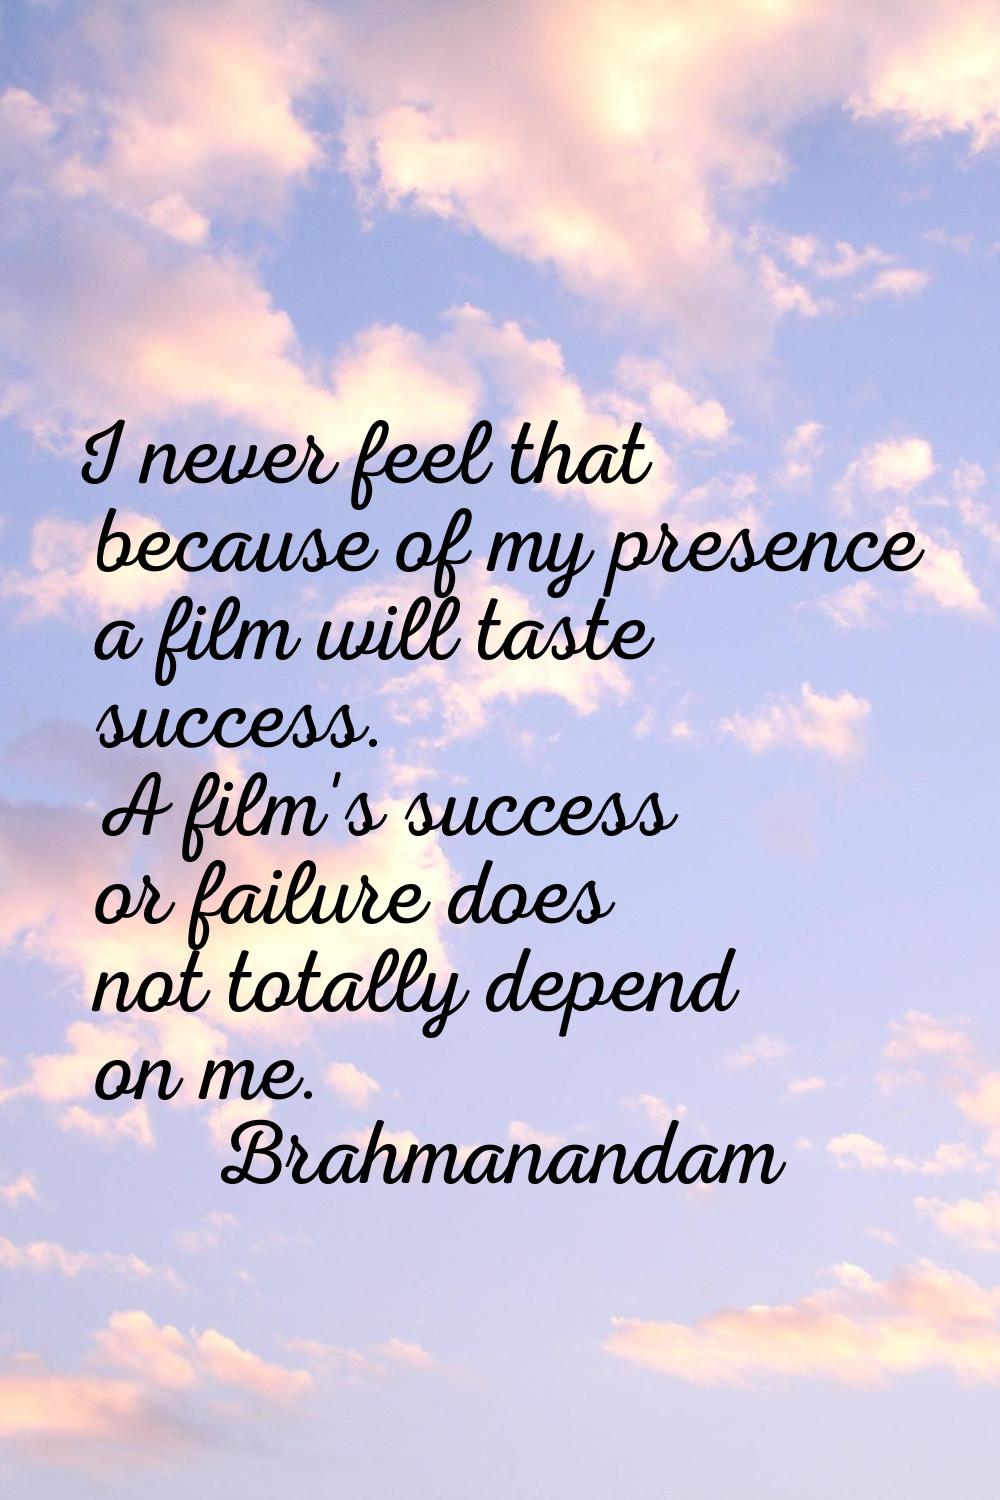 I never feel that because of my presence a film will taste success. A film's success or failure doe